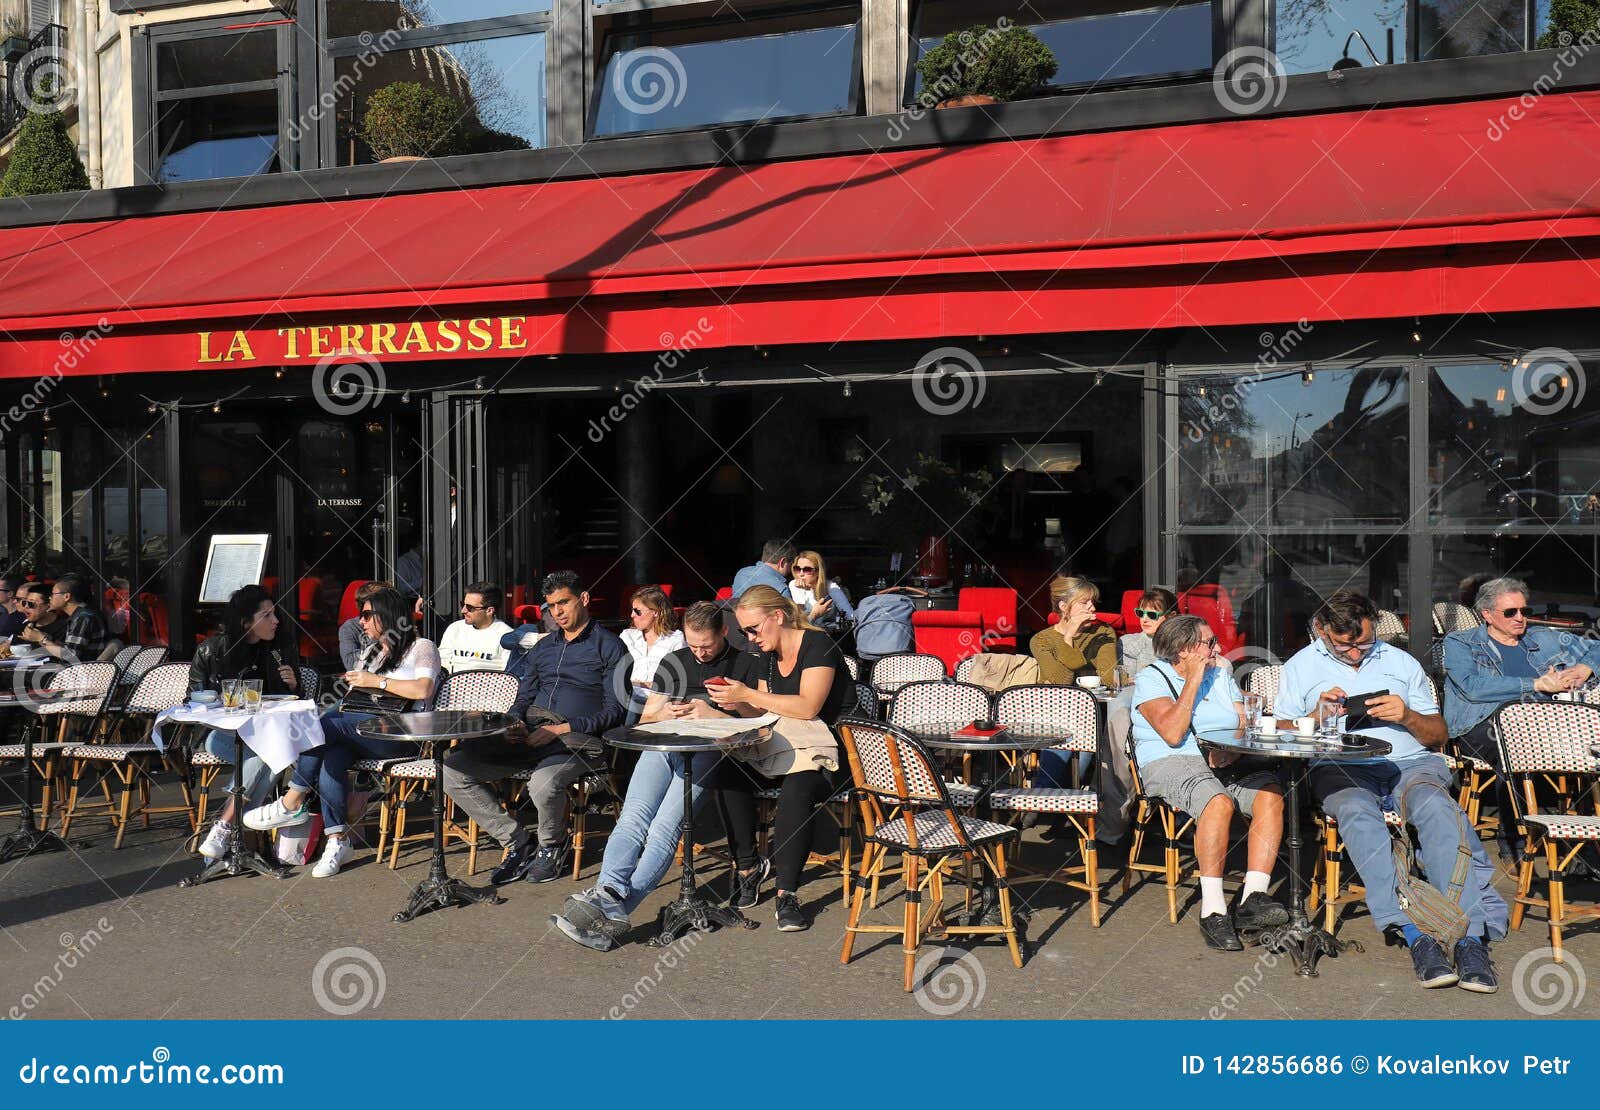 La Terrasse Is Traditonal French Cafe Located Near The ...